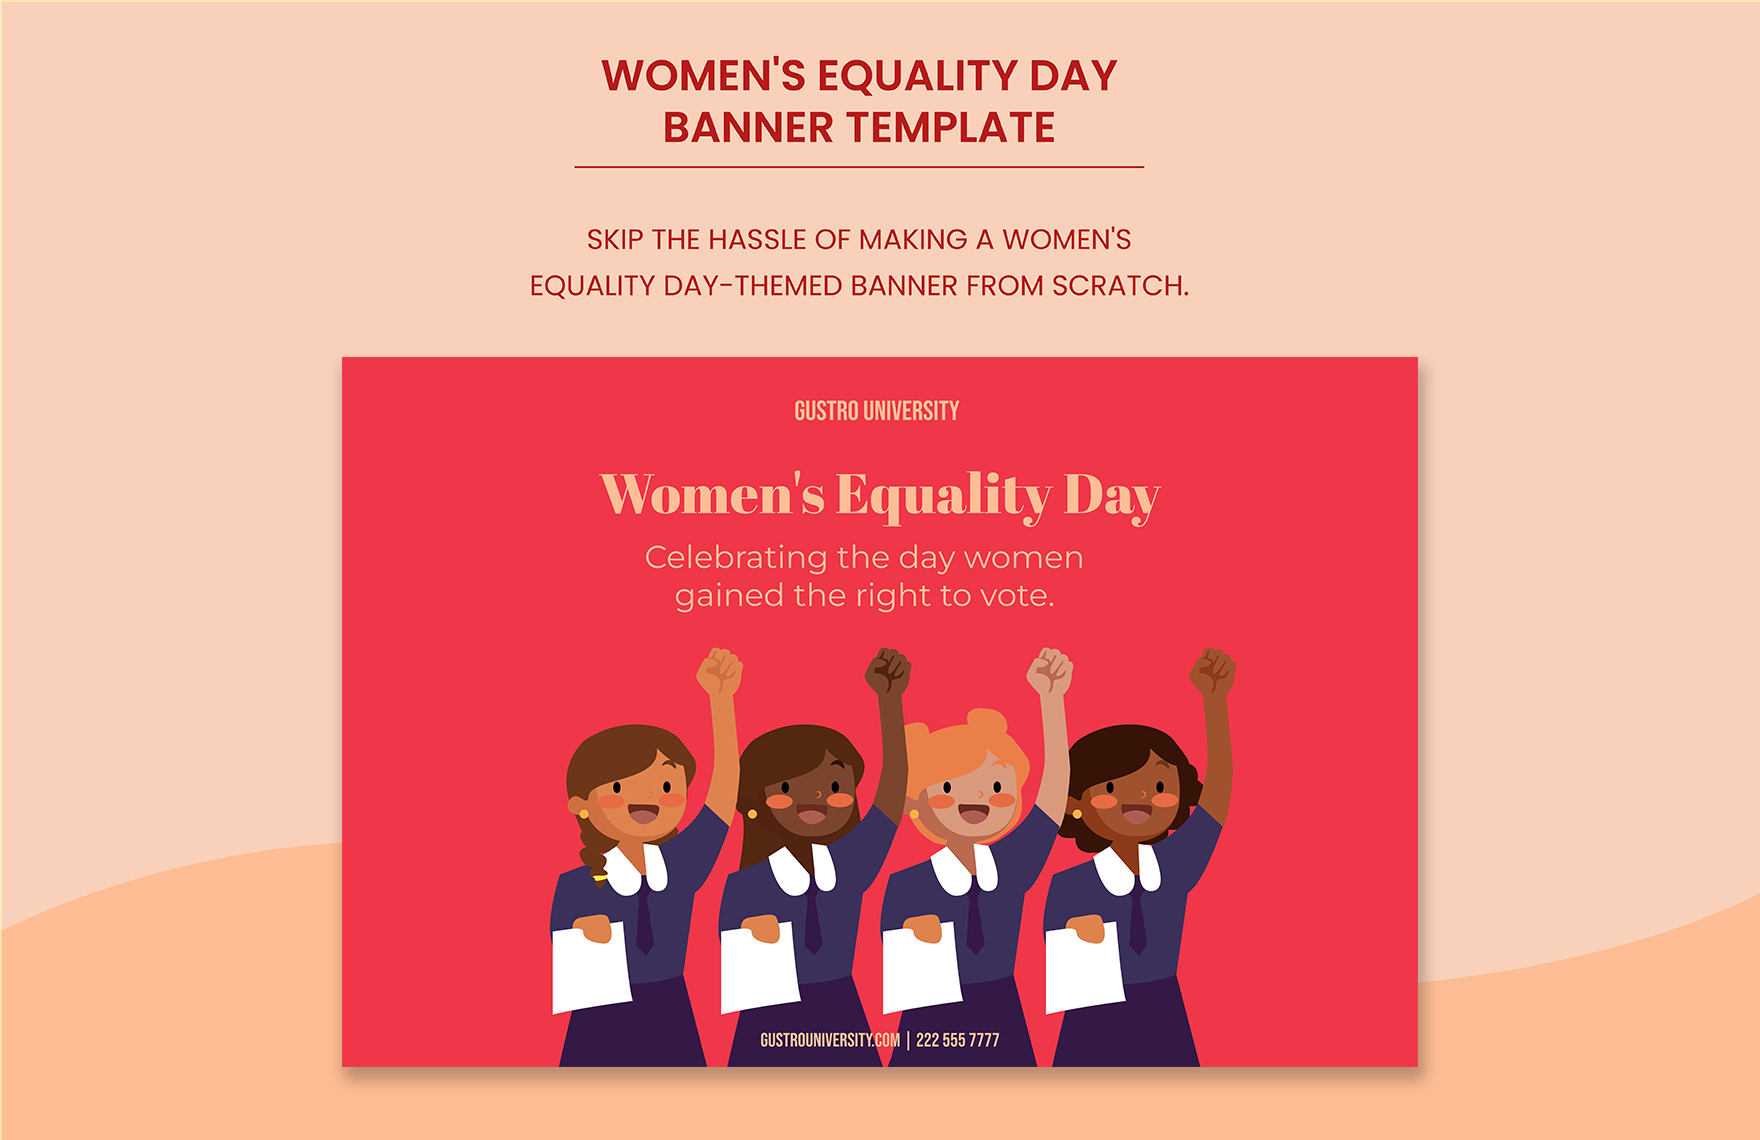 Women's Equality Day Banner Template